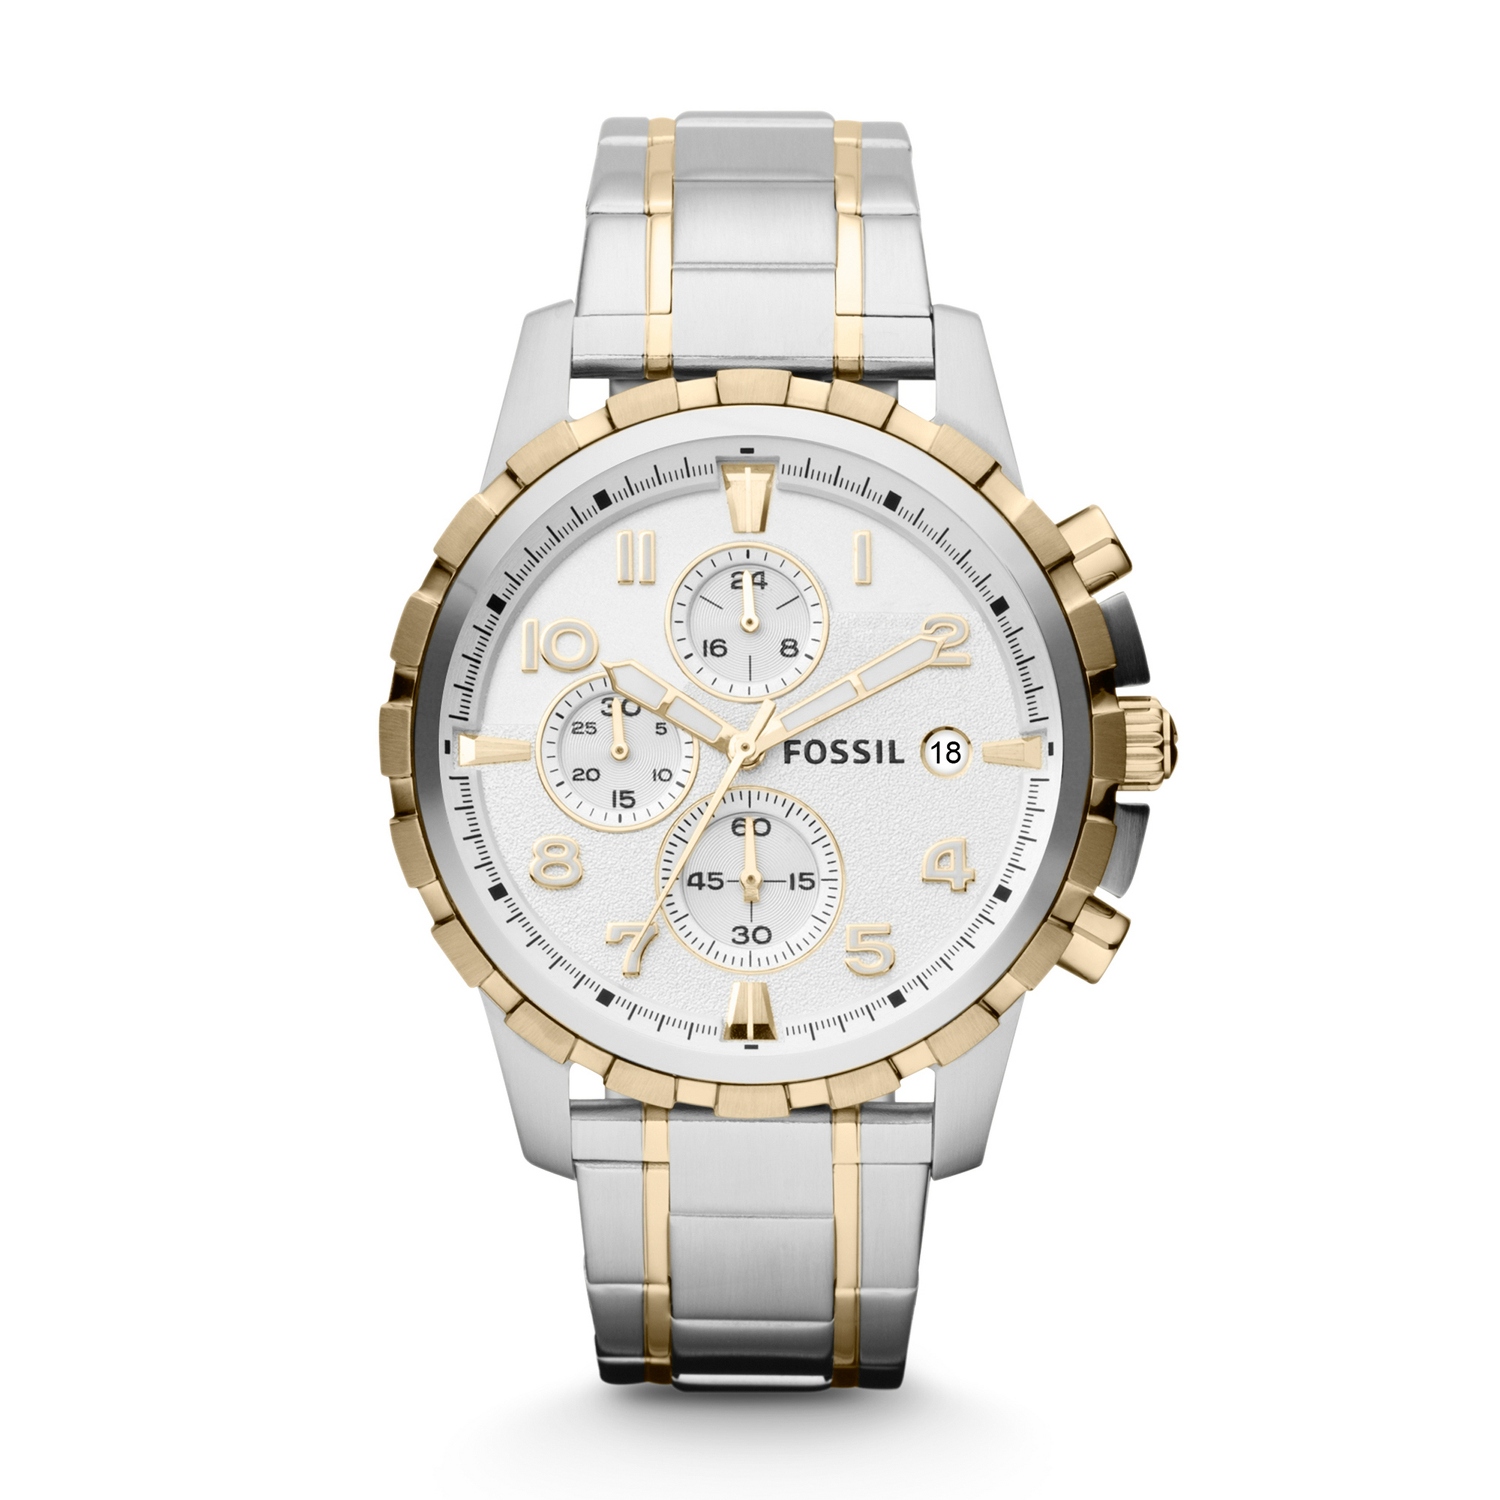 FOSSIL Mens Dean Chronograph Stainless Steel Watch